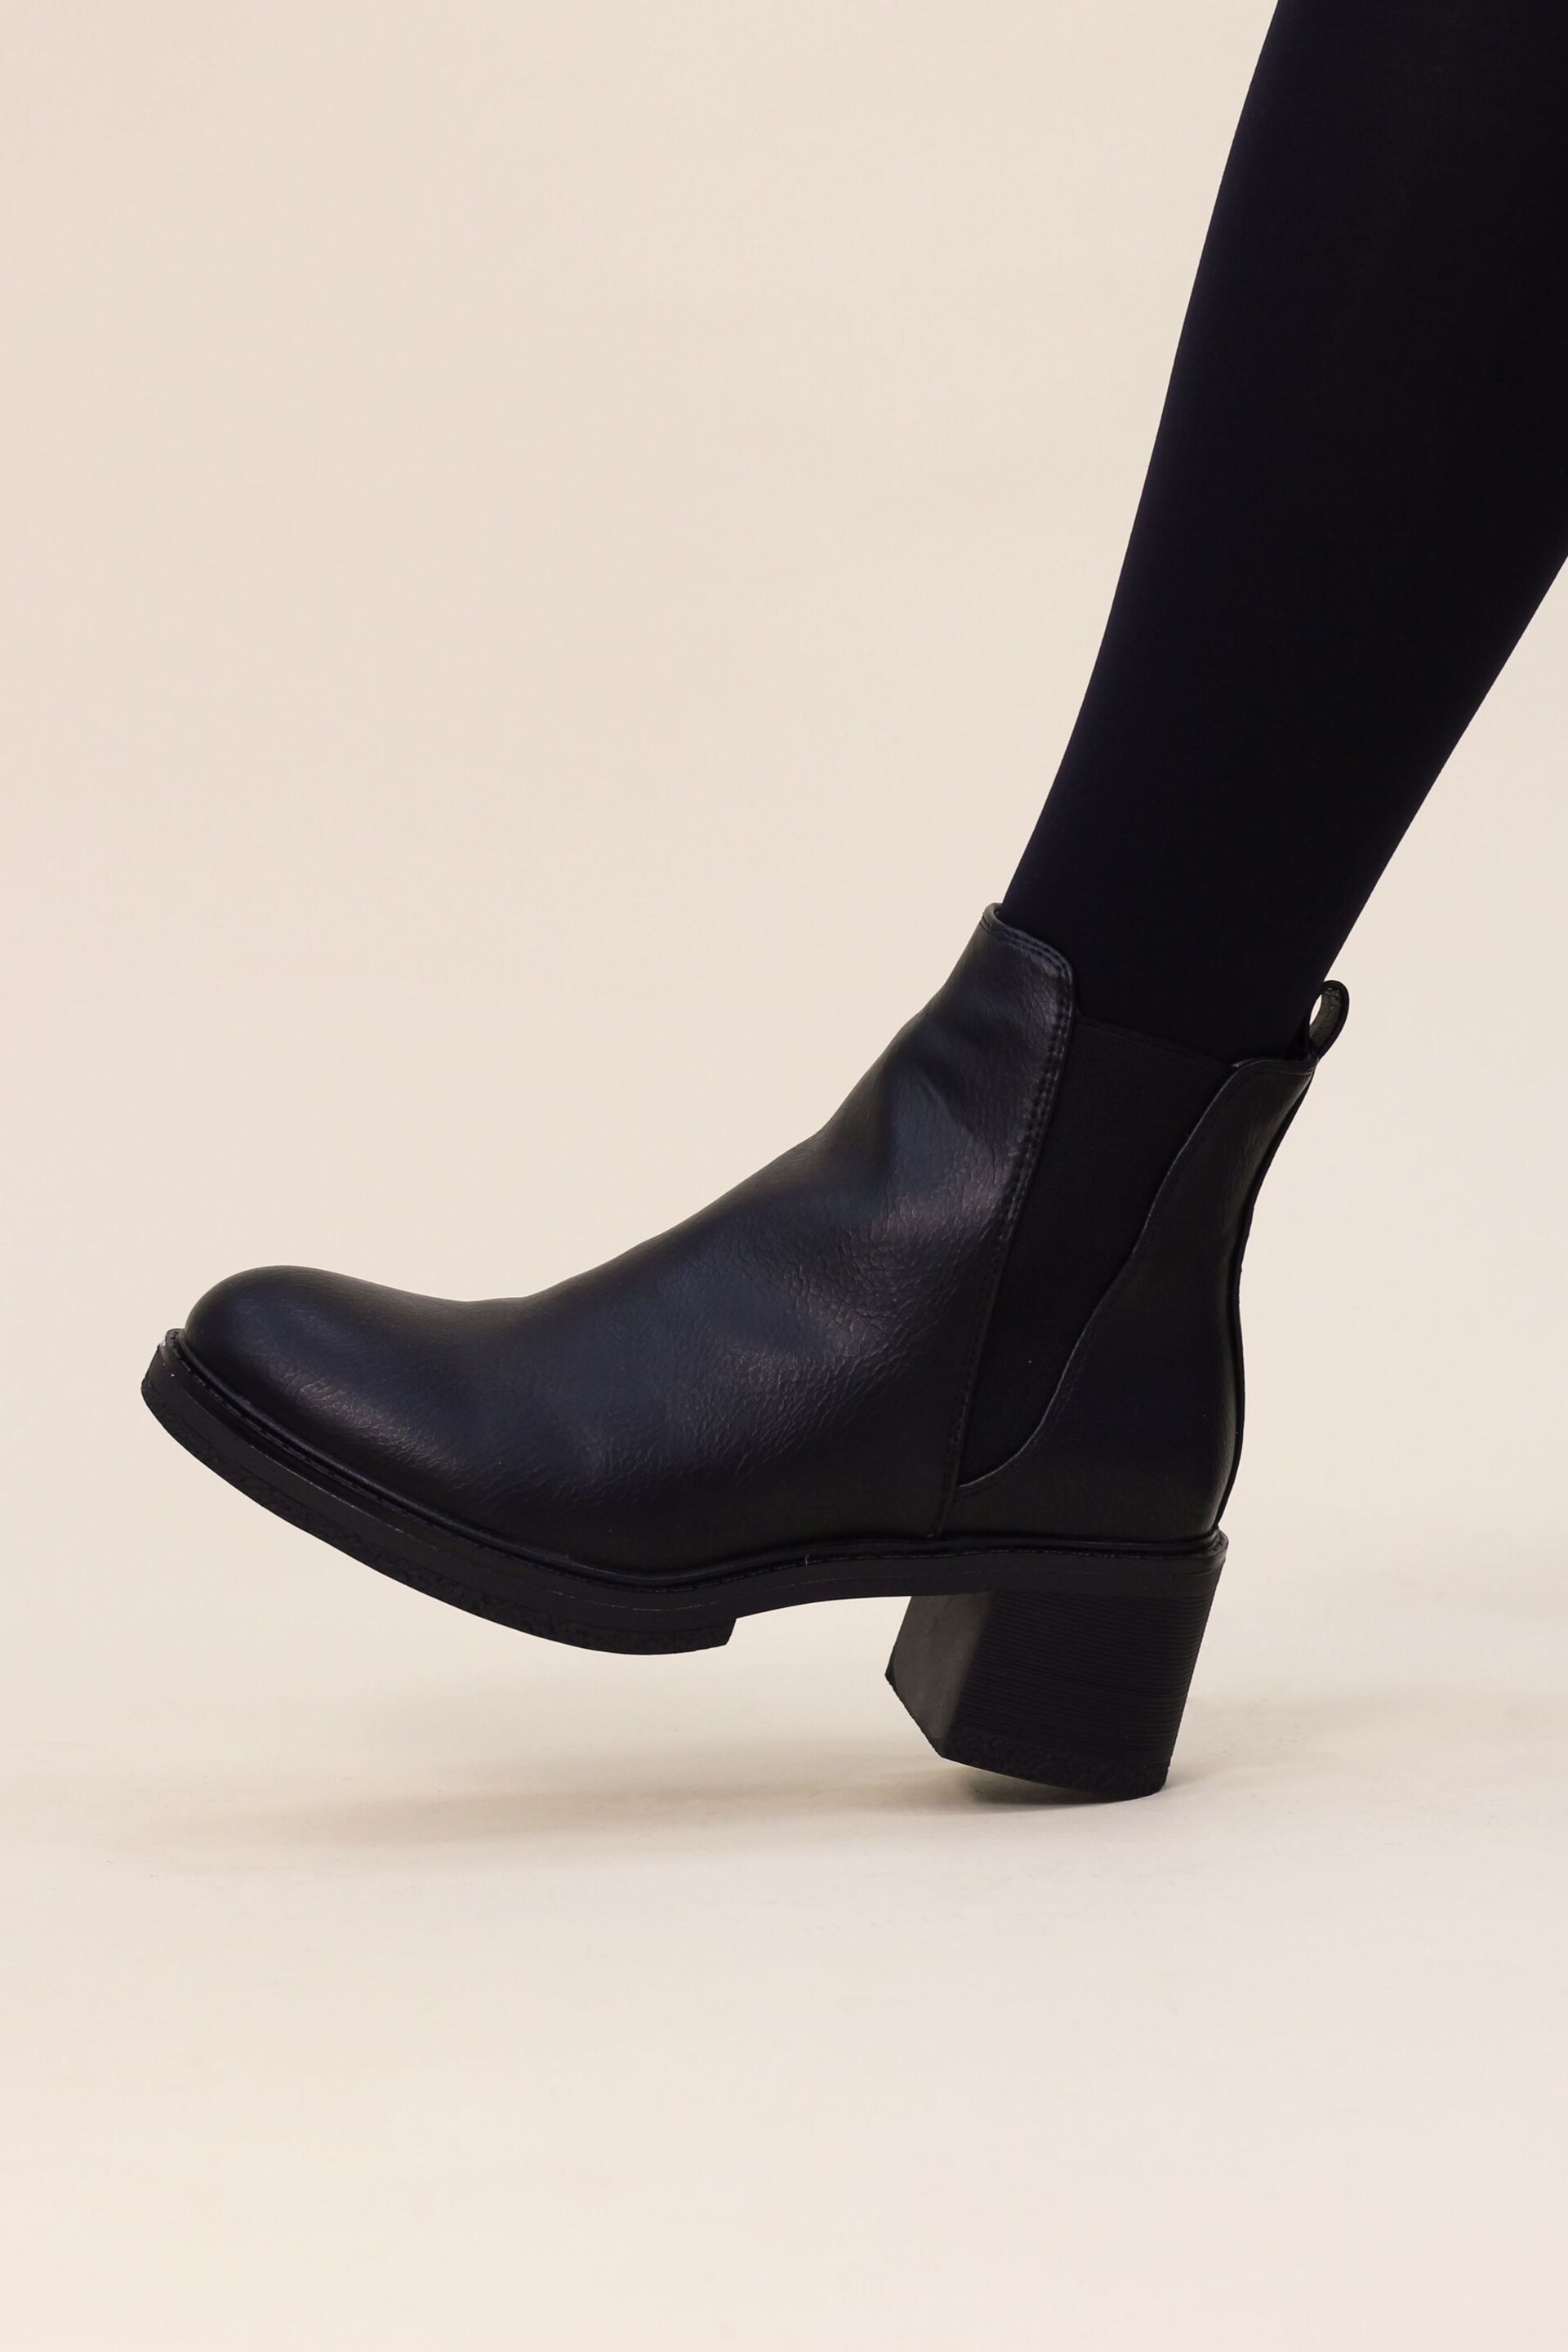 Lunar Ophelia Block Heel Ankle Boots - Image 9 of 9